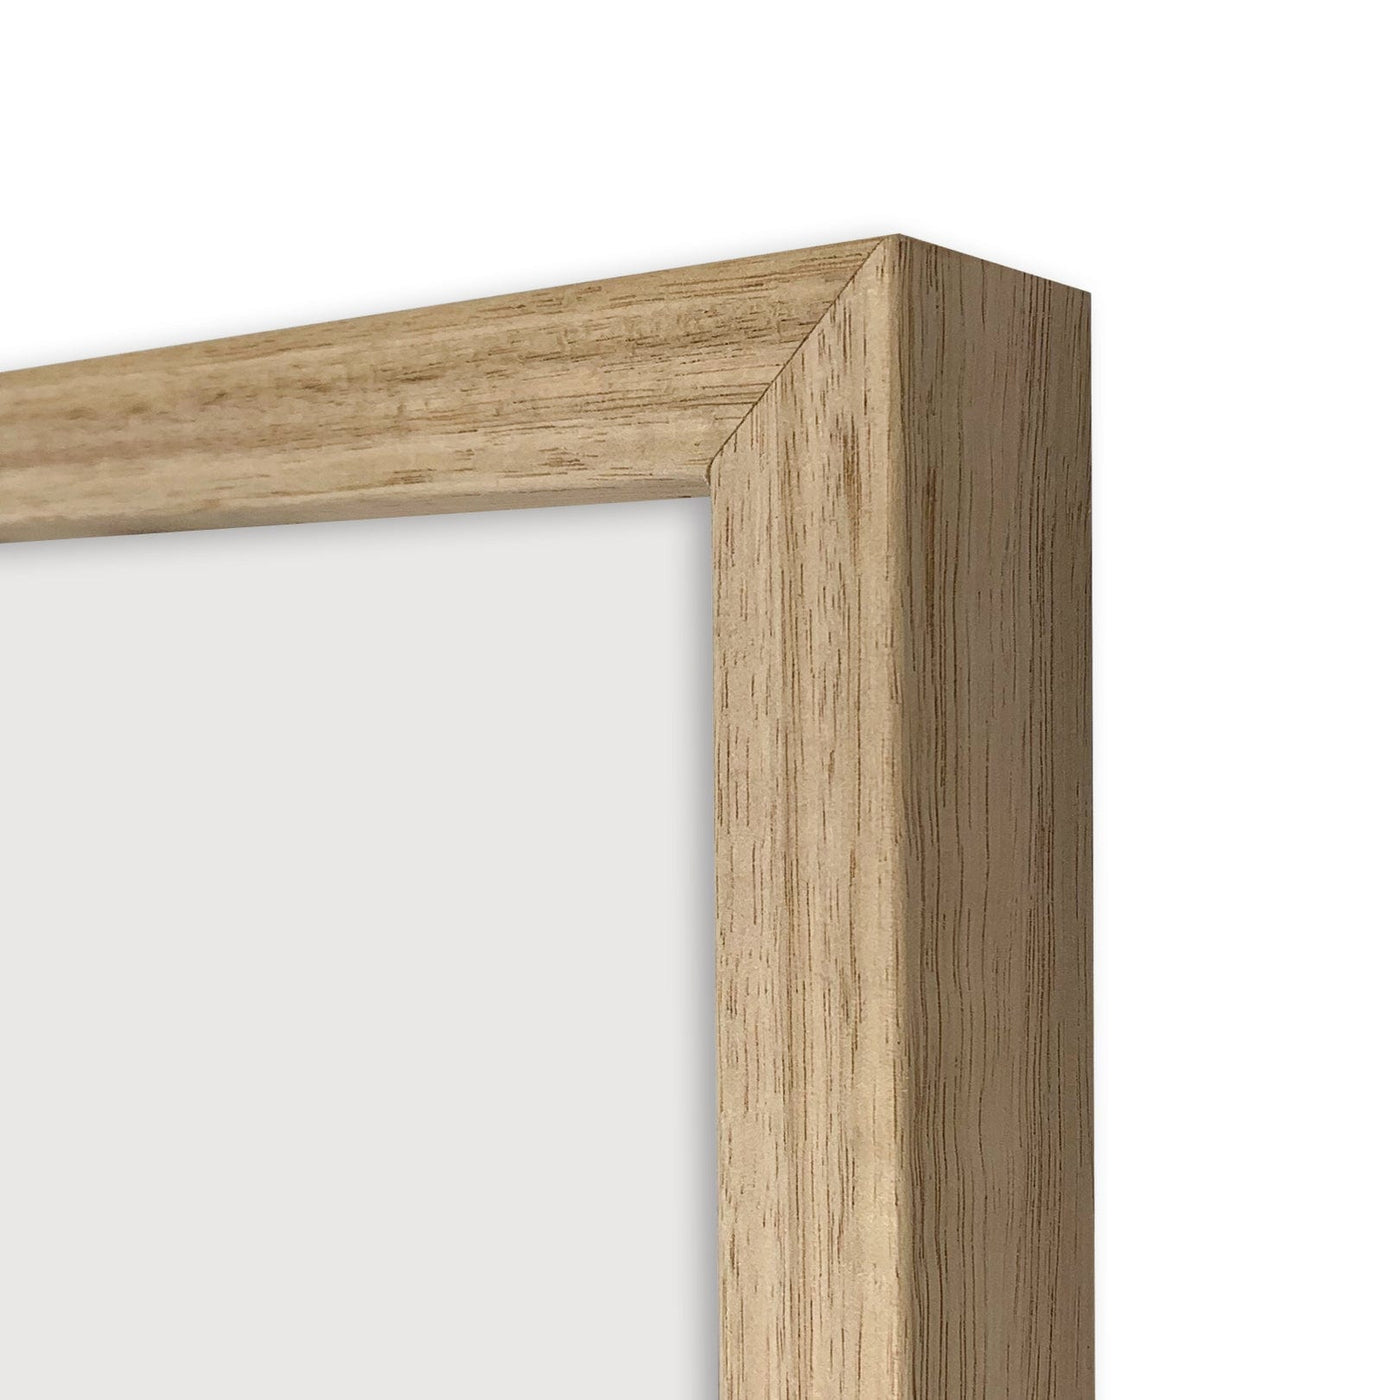 Elegant Victorian Ash Natural Oak A4 Picture Frame from our Australian Made A4 Picture Frames collection by Profile Products Australia